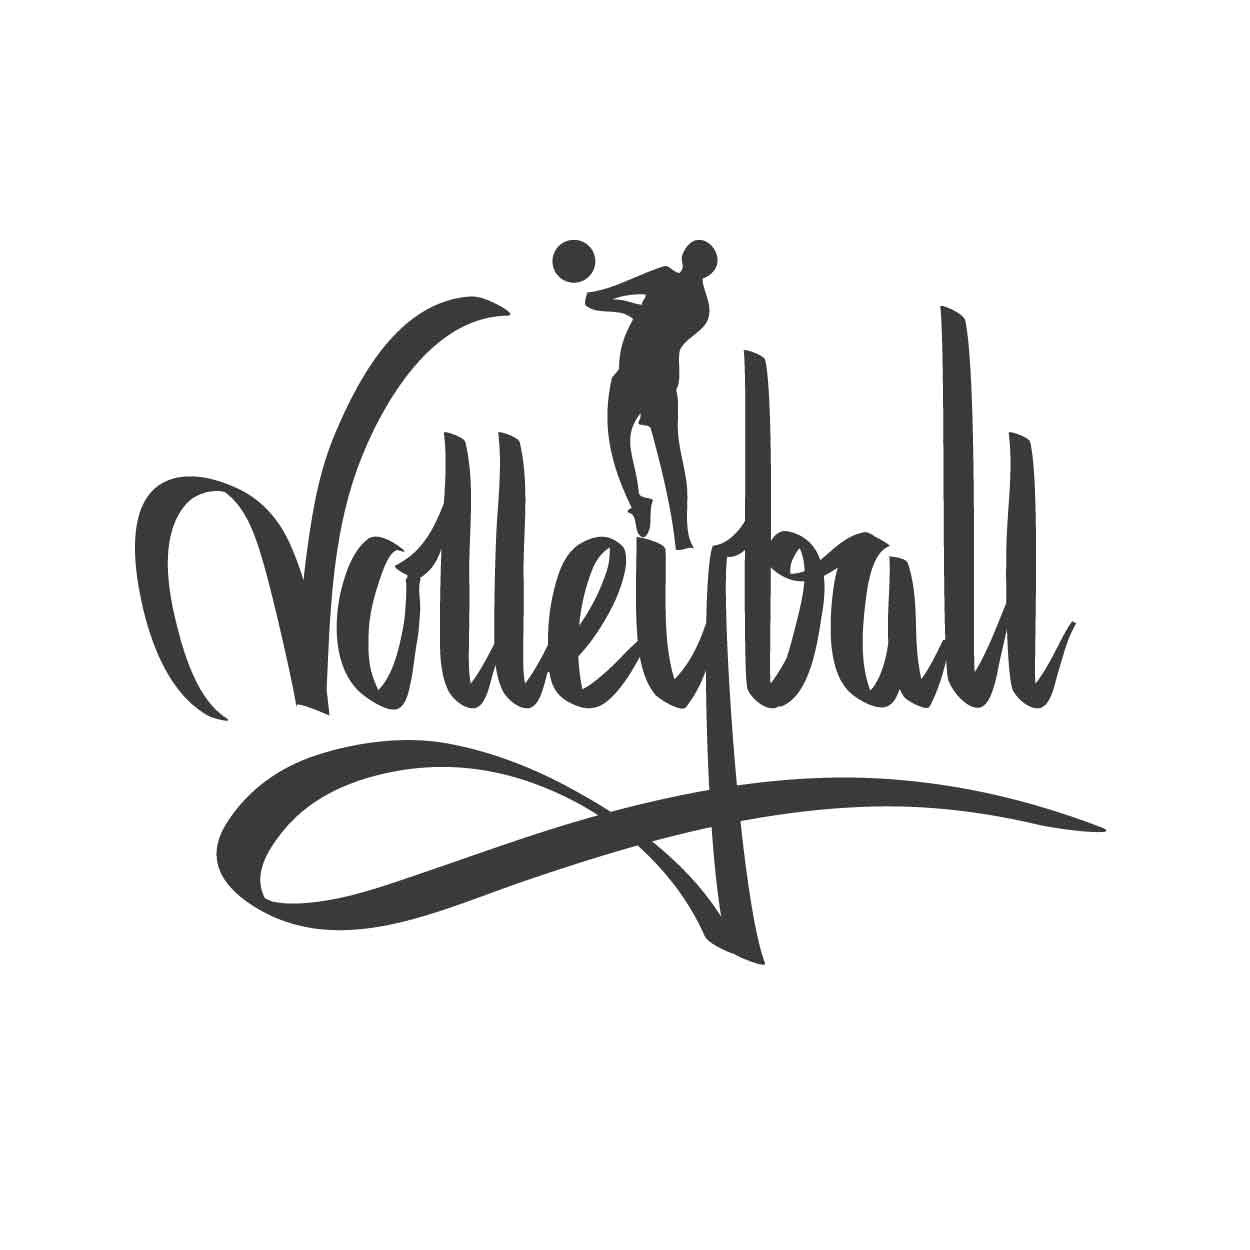 Volleyball quotes wallpapers.